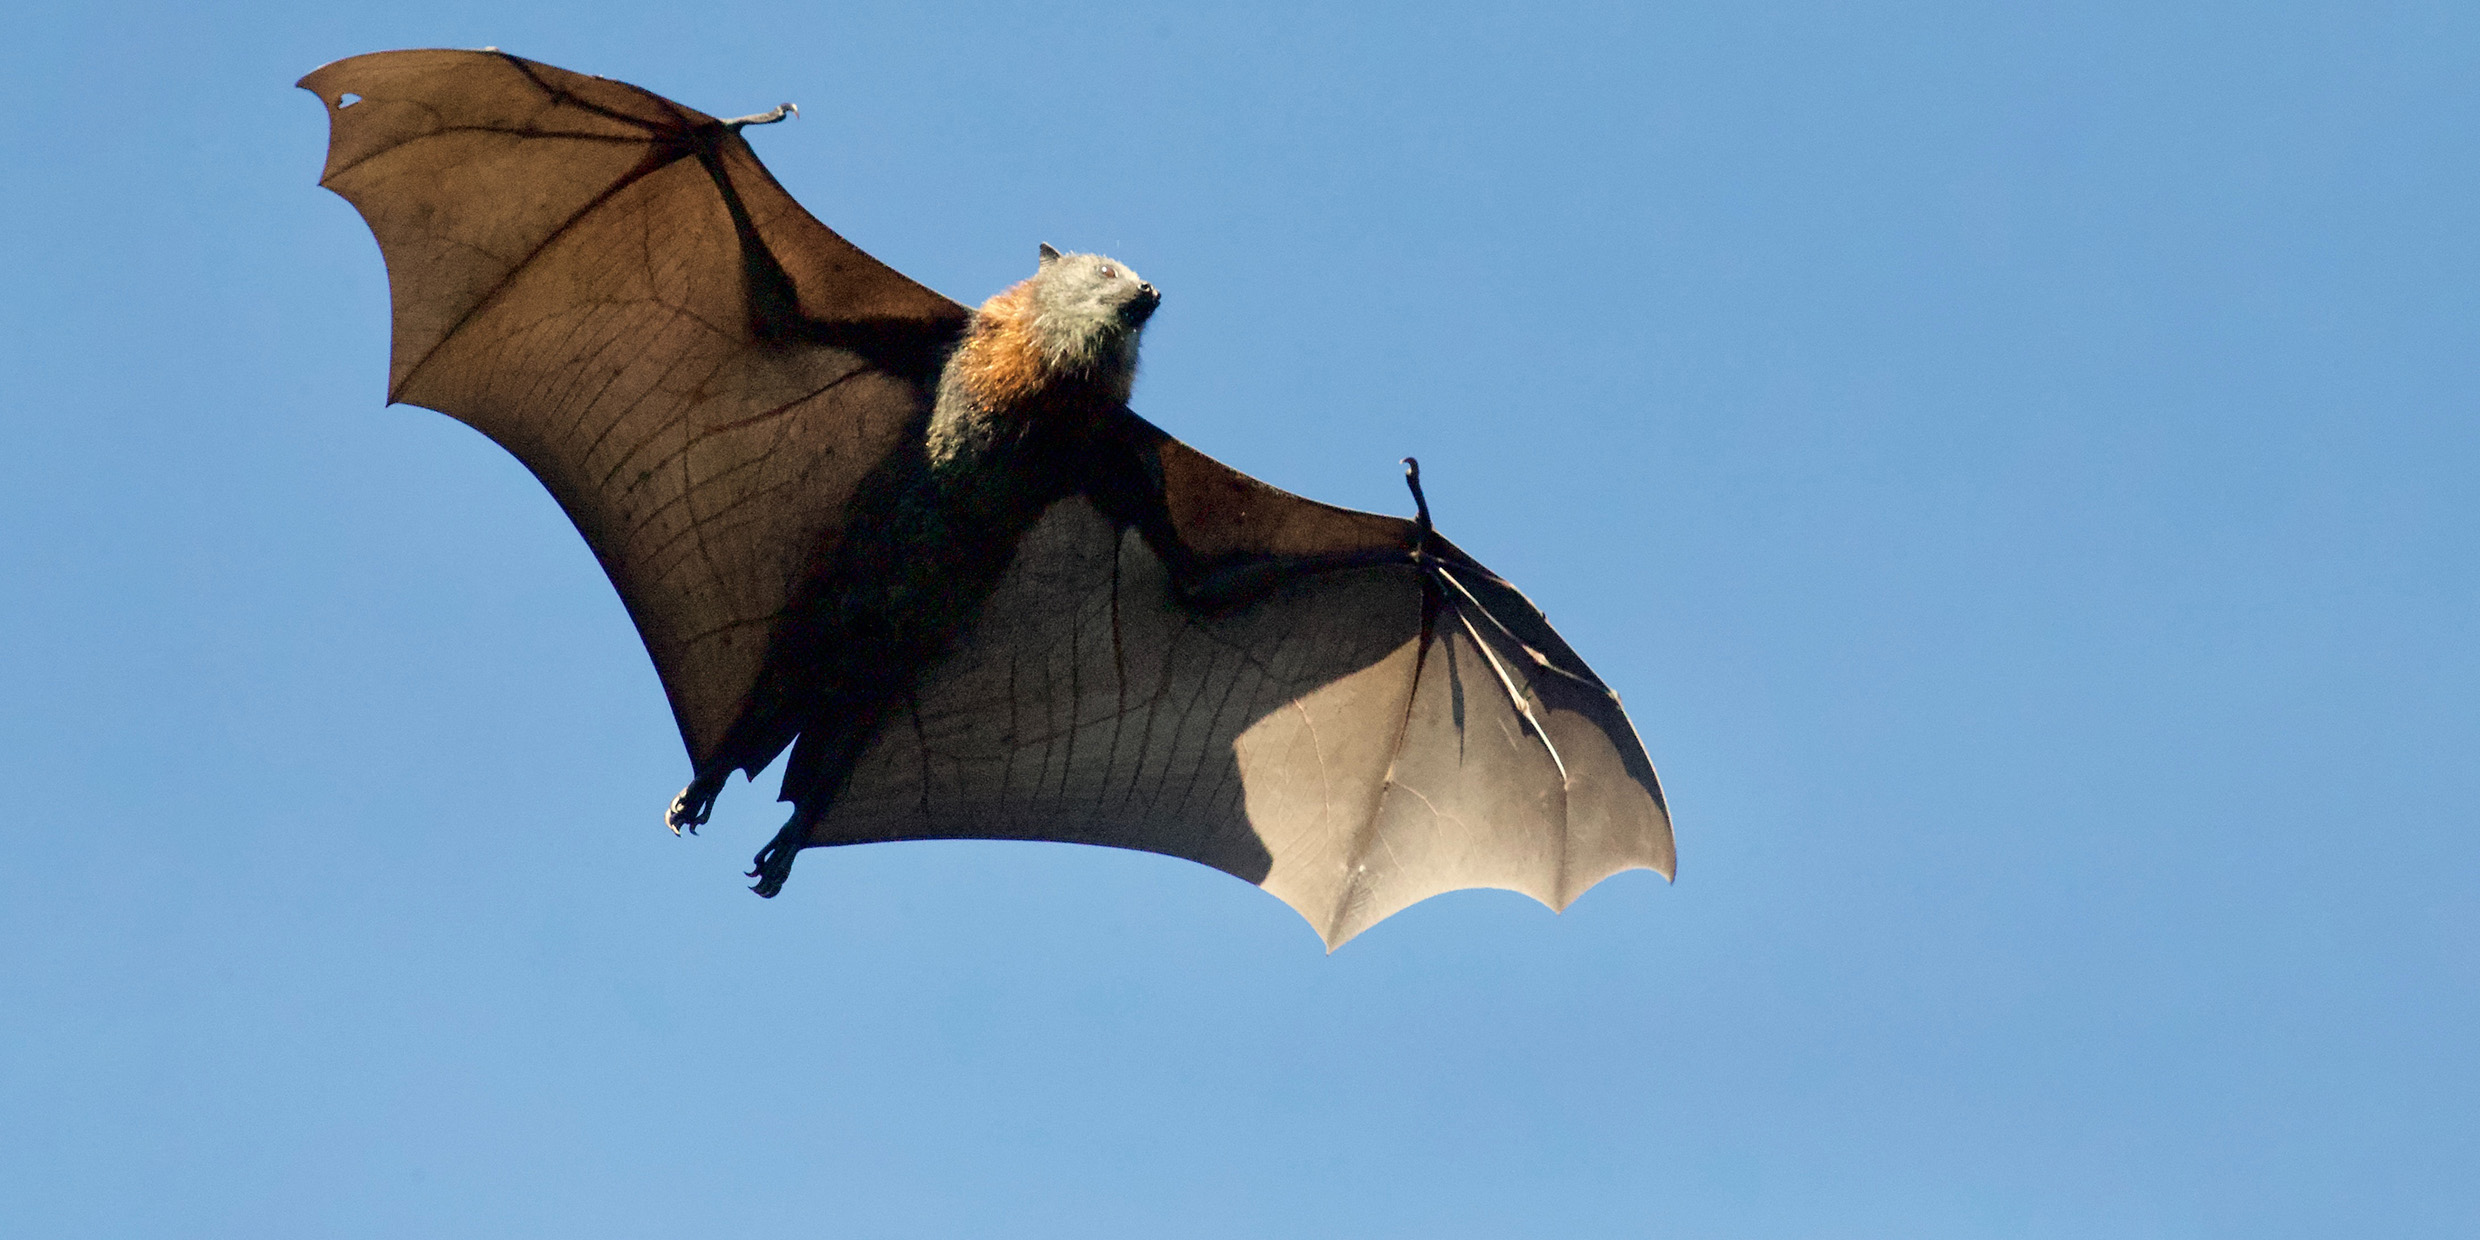 Photo of a bat with wings outstretched in flight